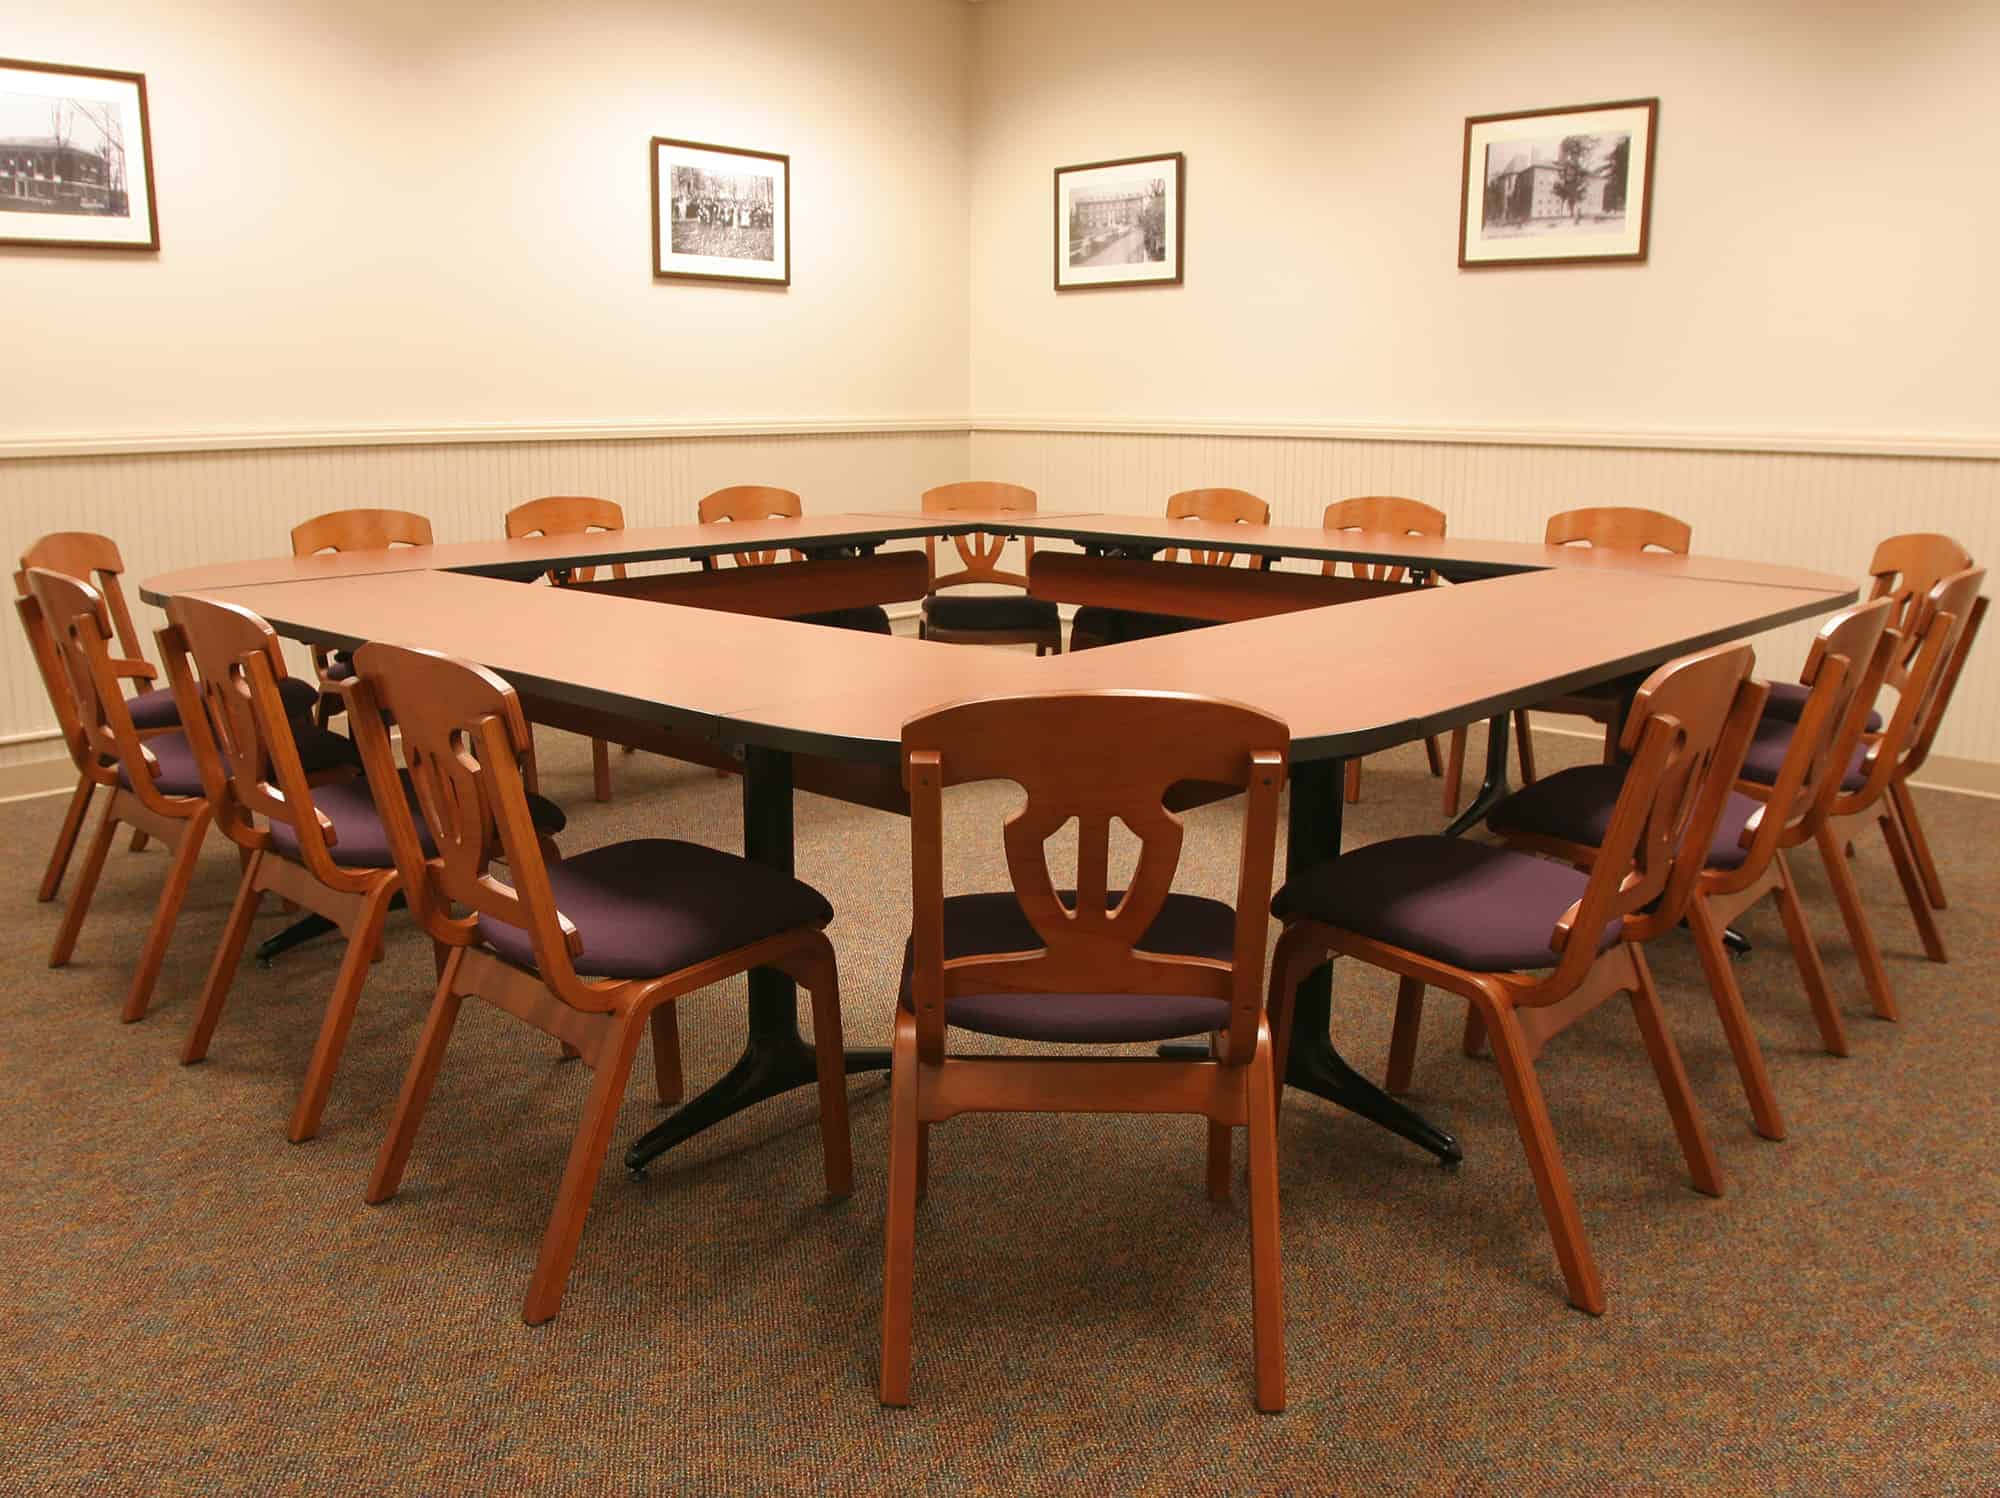 Plylok Side Chairs in meeting area